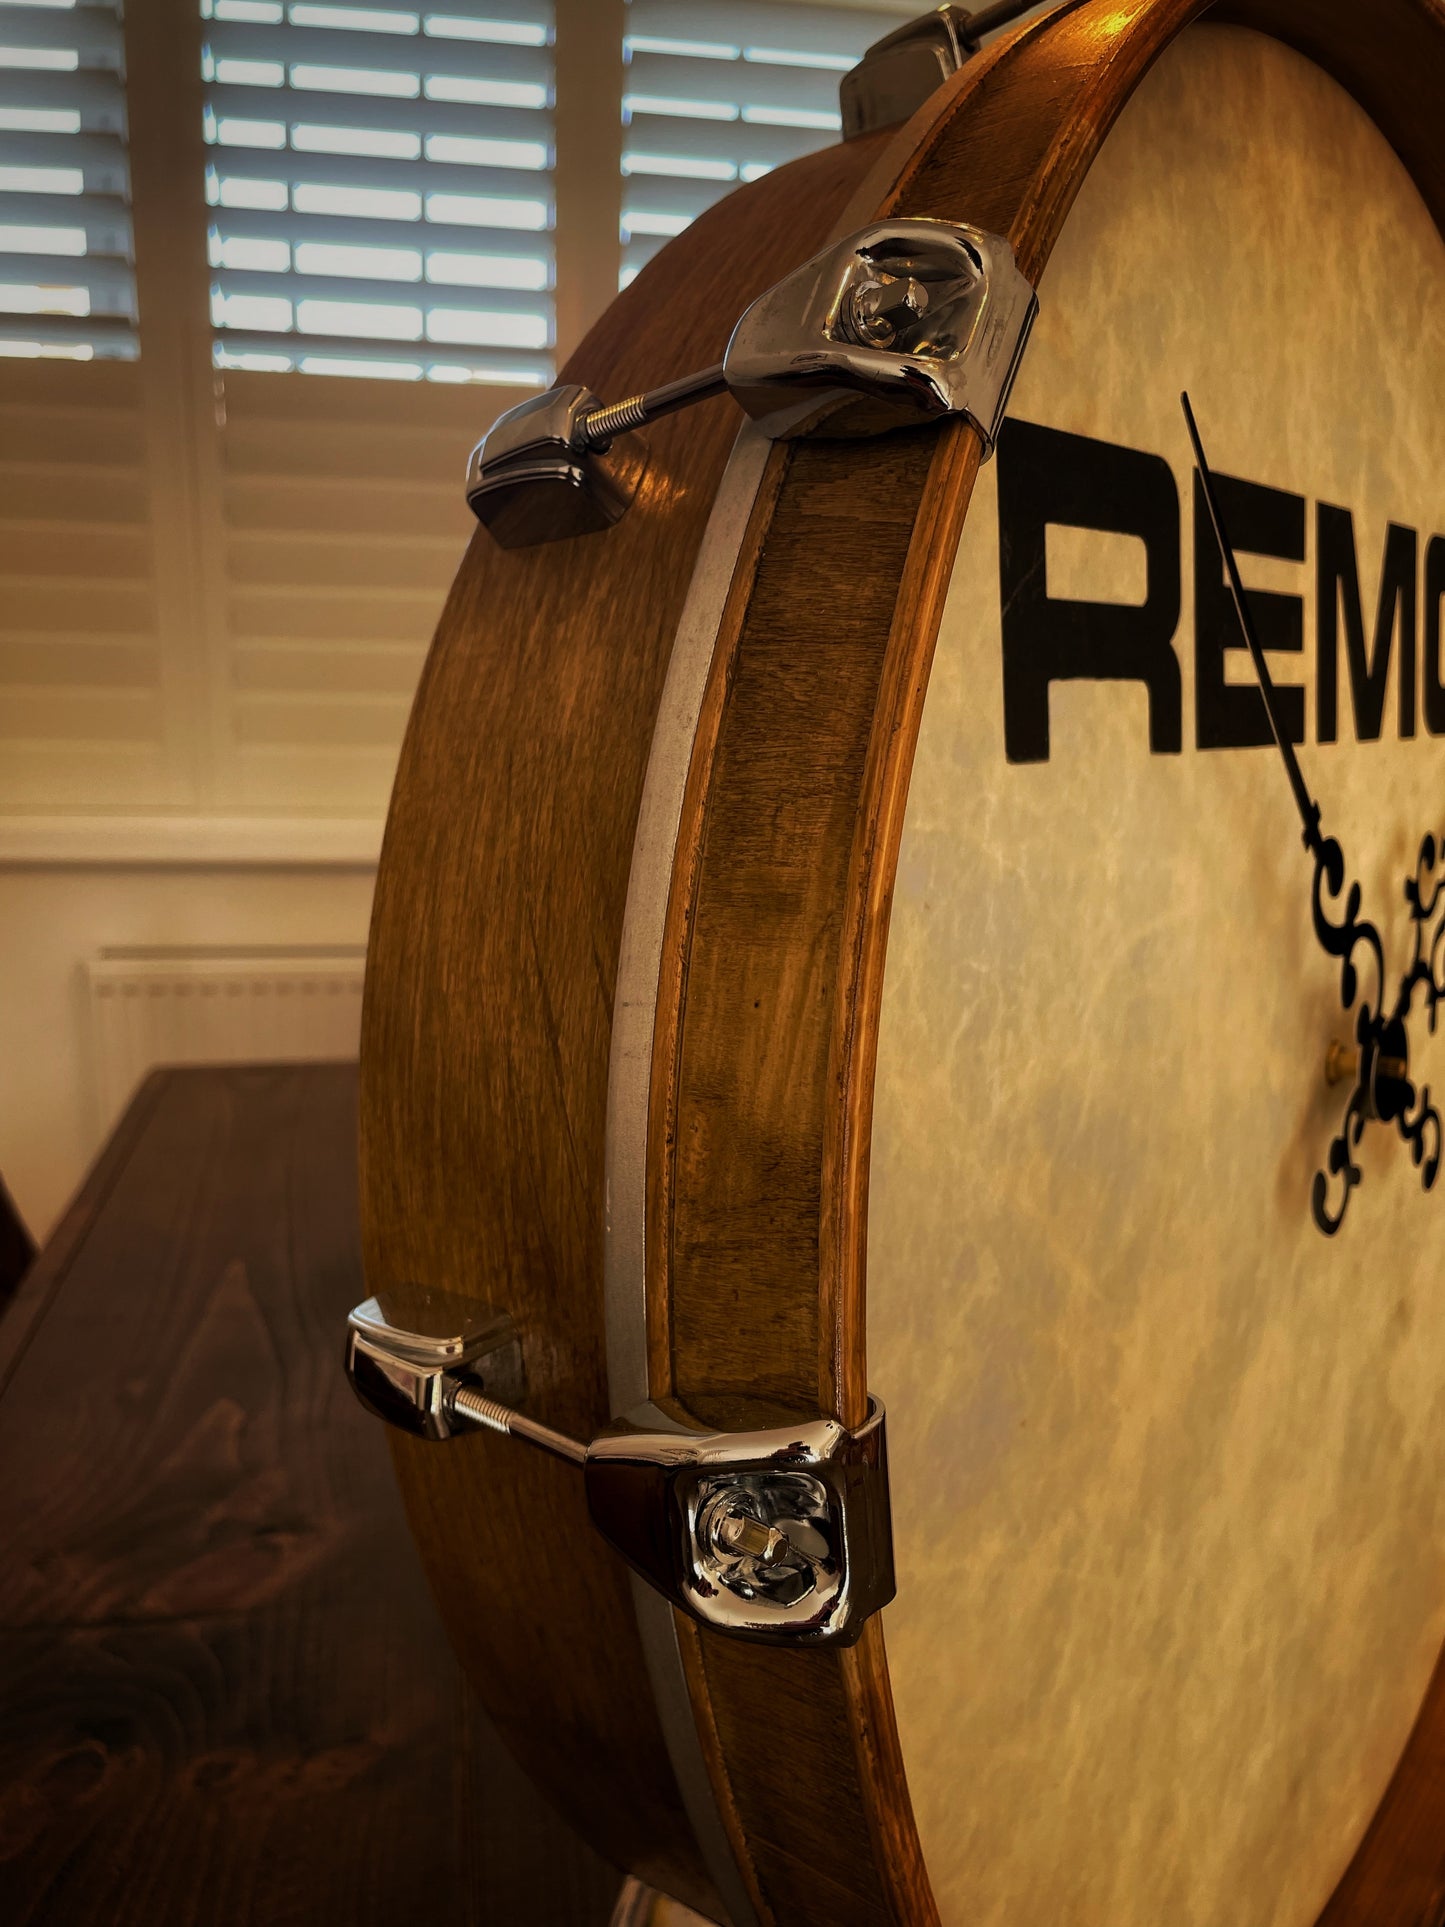 Remo Drum Clock / Wall Feature Mounted 22” Drum Clock / Rustic / Upcycled Drum